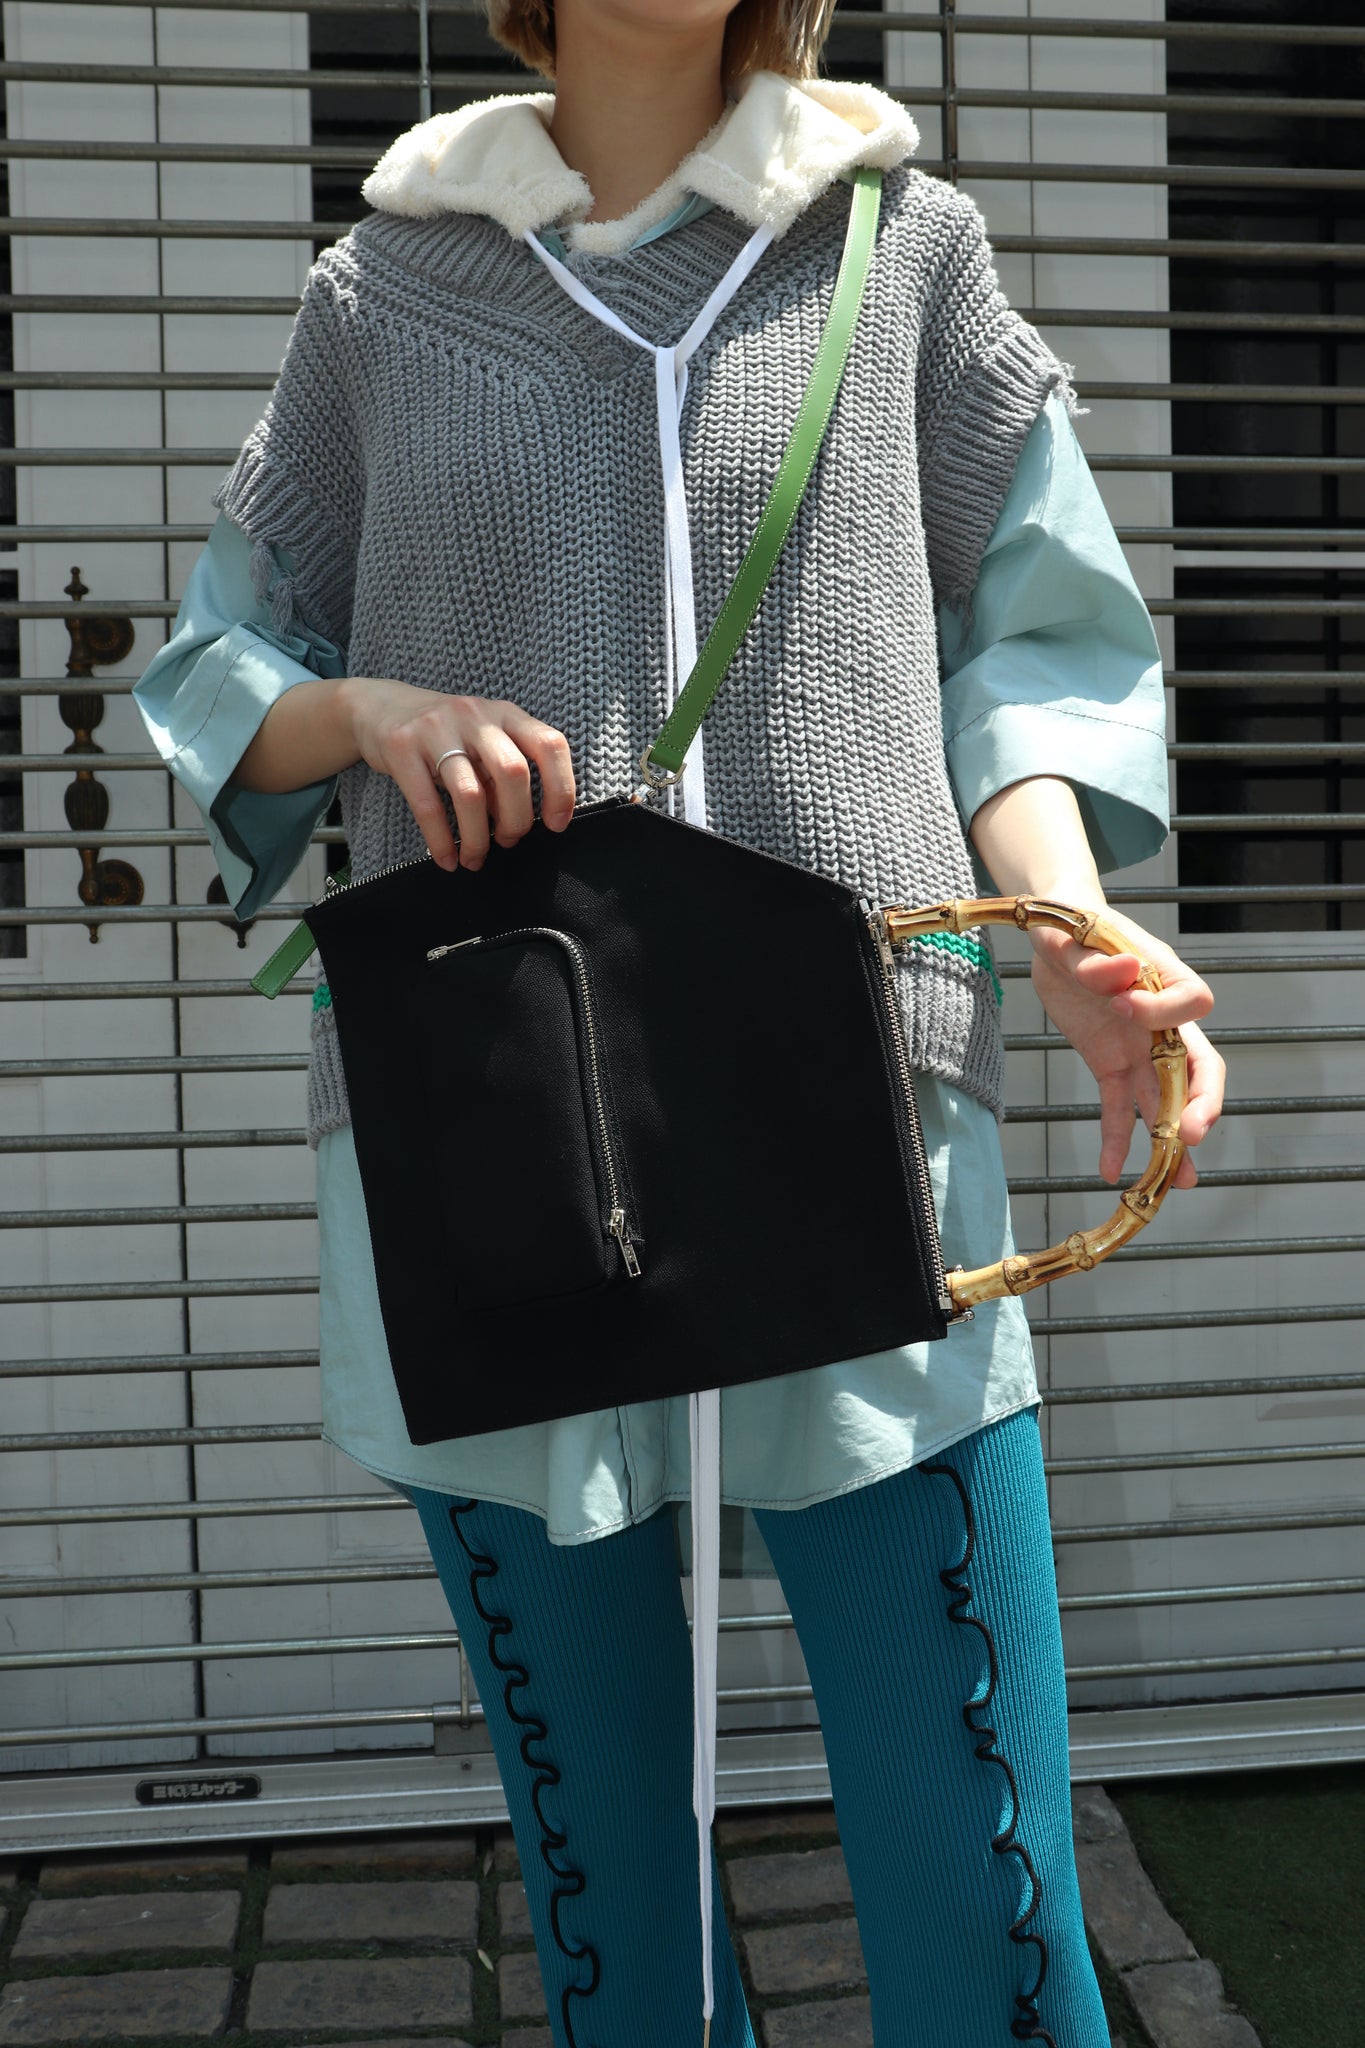 BLACK of the 22ss of SODUK's 22SS and the Green of the SHIRT AND KNIT of SODUK and the 22ss Colored Stitch Slit Knit Trousers Green and Masu's 22SS Sleevels Hoody w Hite 46 wearing images